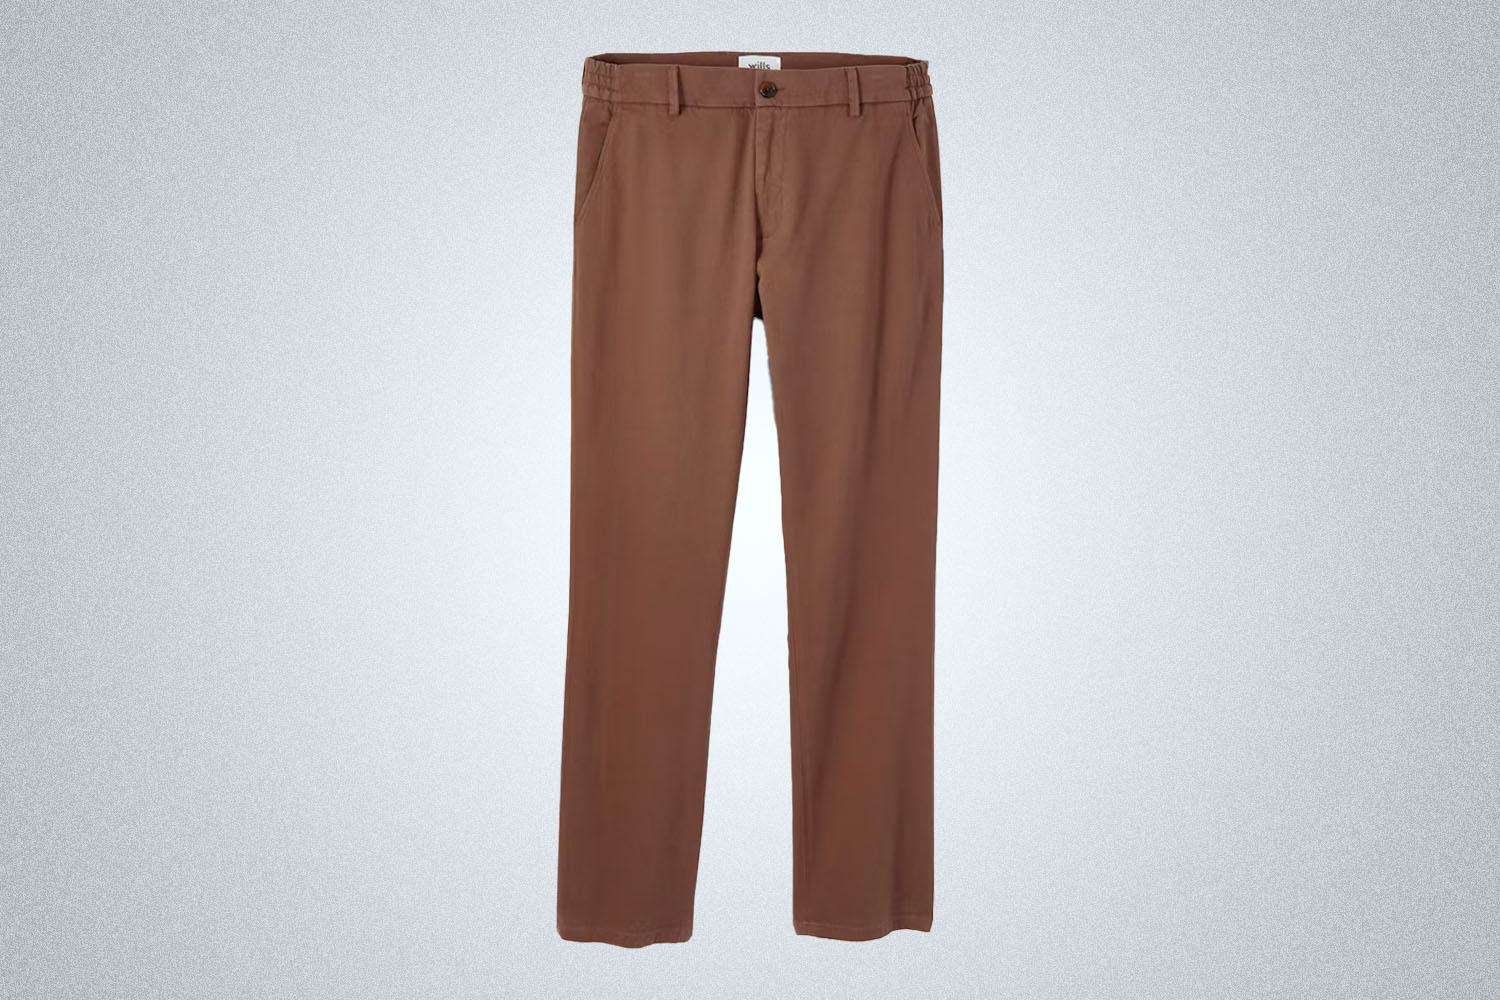 a pair of brown Wills trousers on a grey background